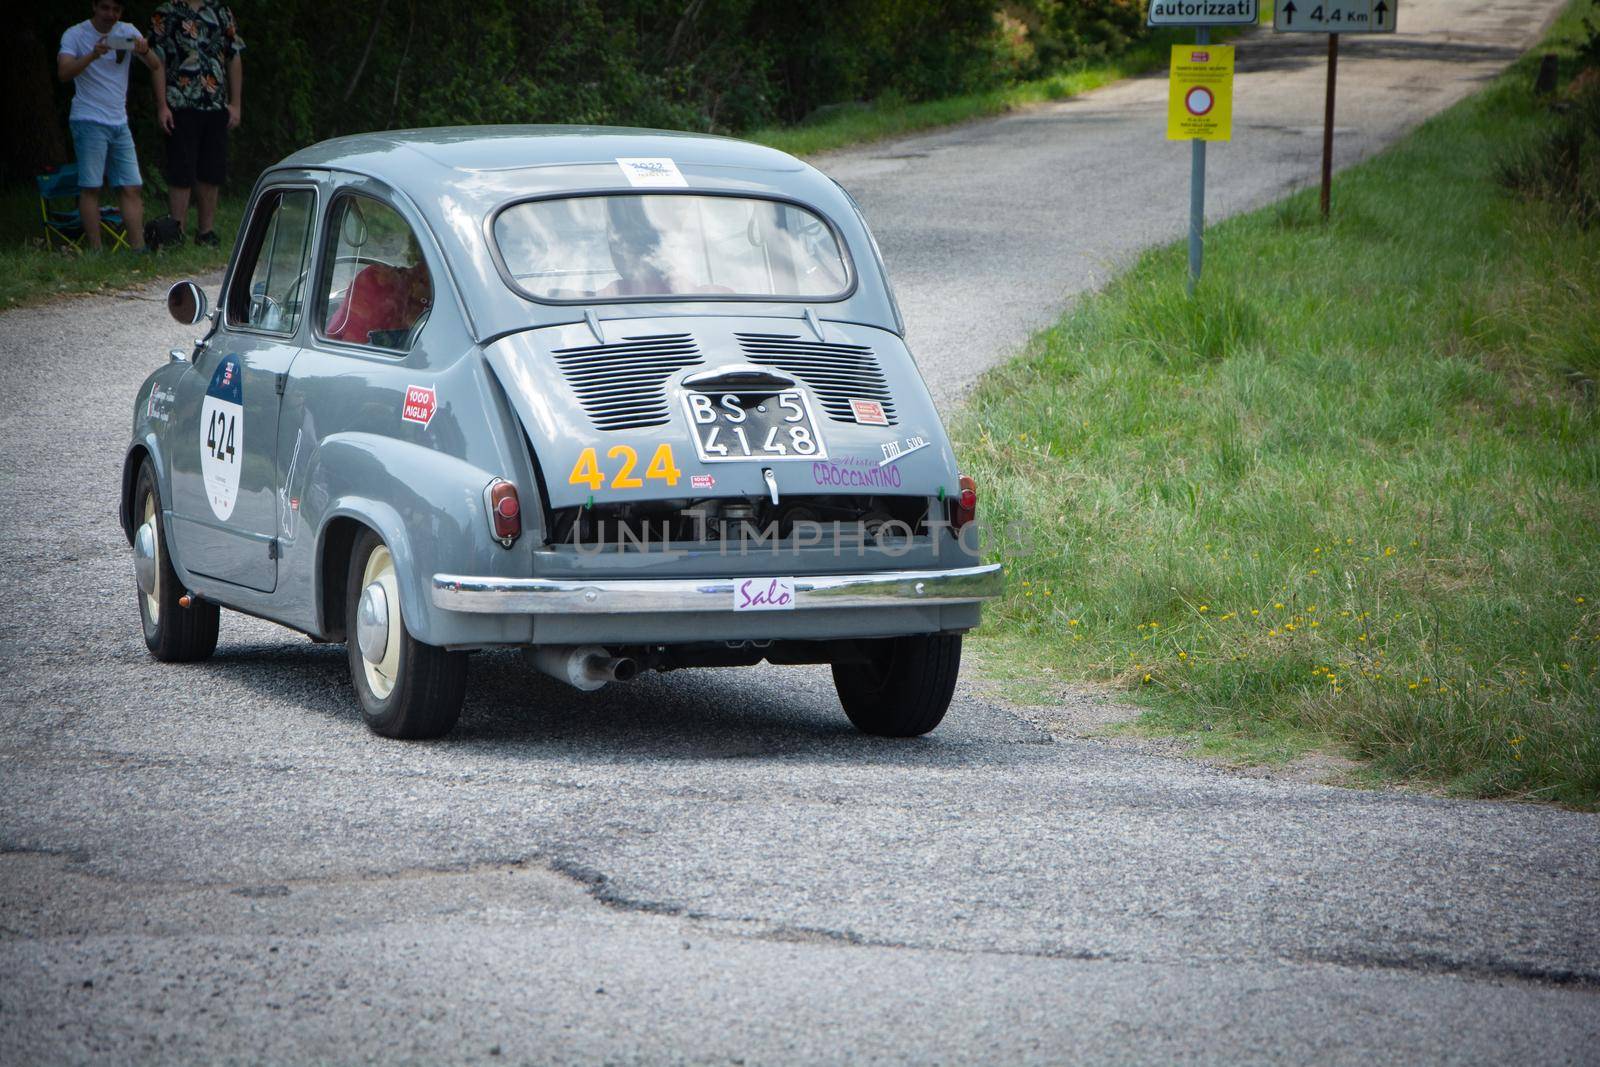 URBINO - ITALY - JUN 16 - 2022 : FIAT 600 1956 on an old racing car in rally Mille Miglia 2022 the famous italian historical race (1927-1957